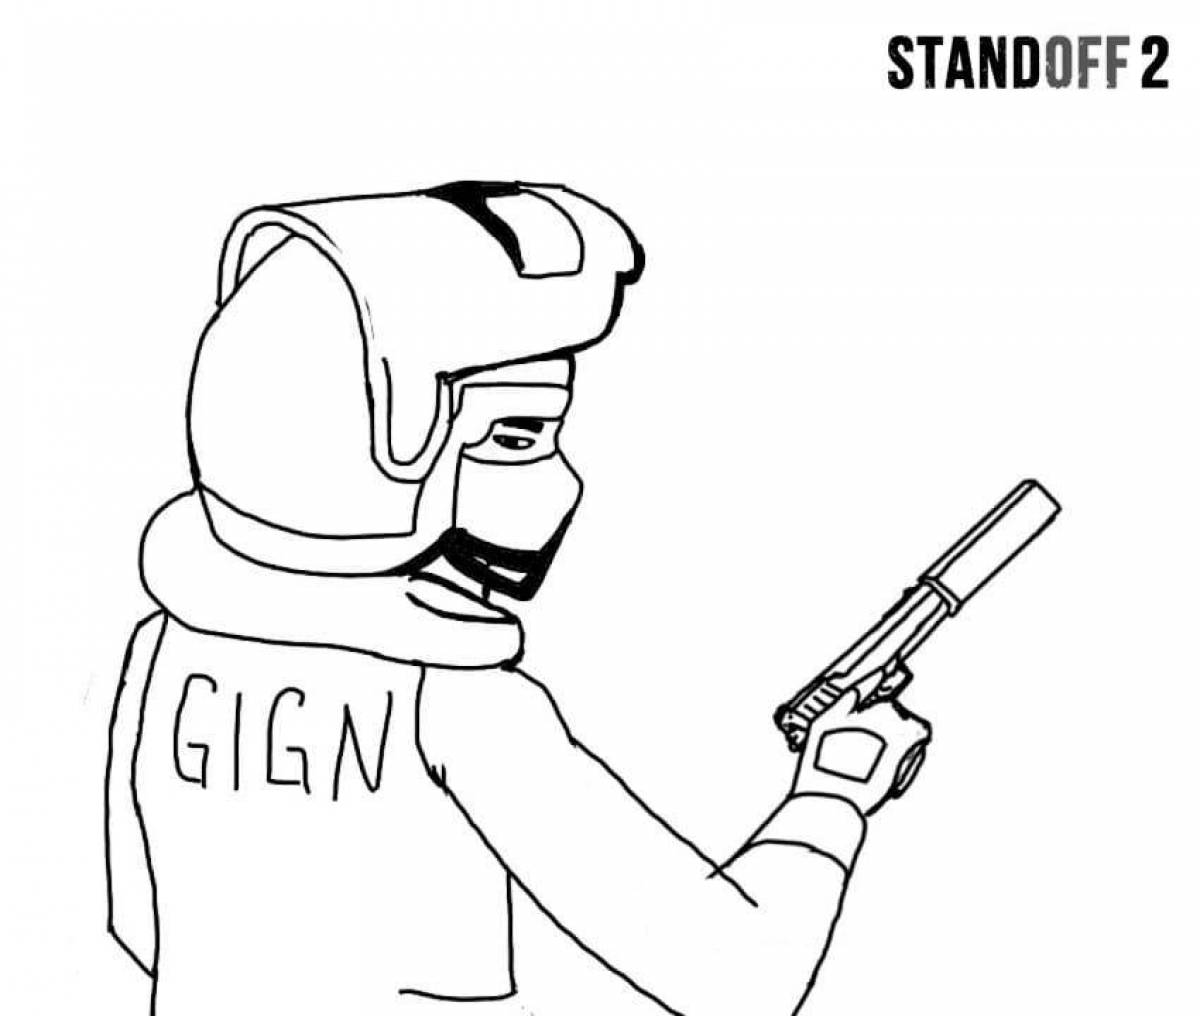 Fine knives coloring page from standoff 2